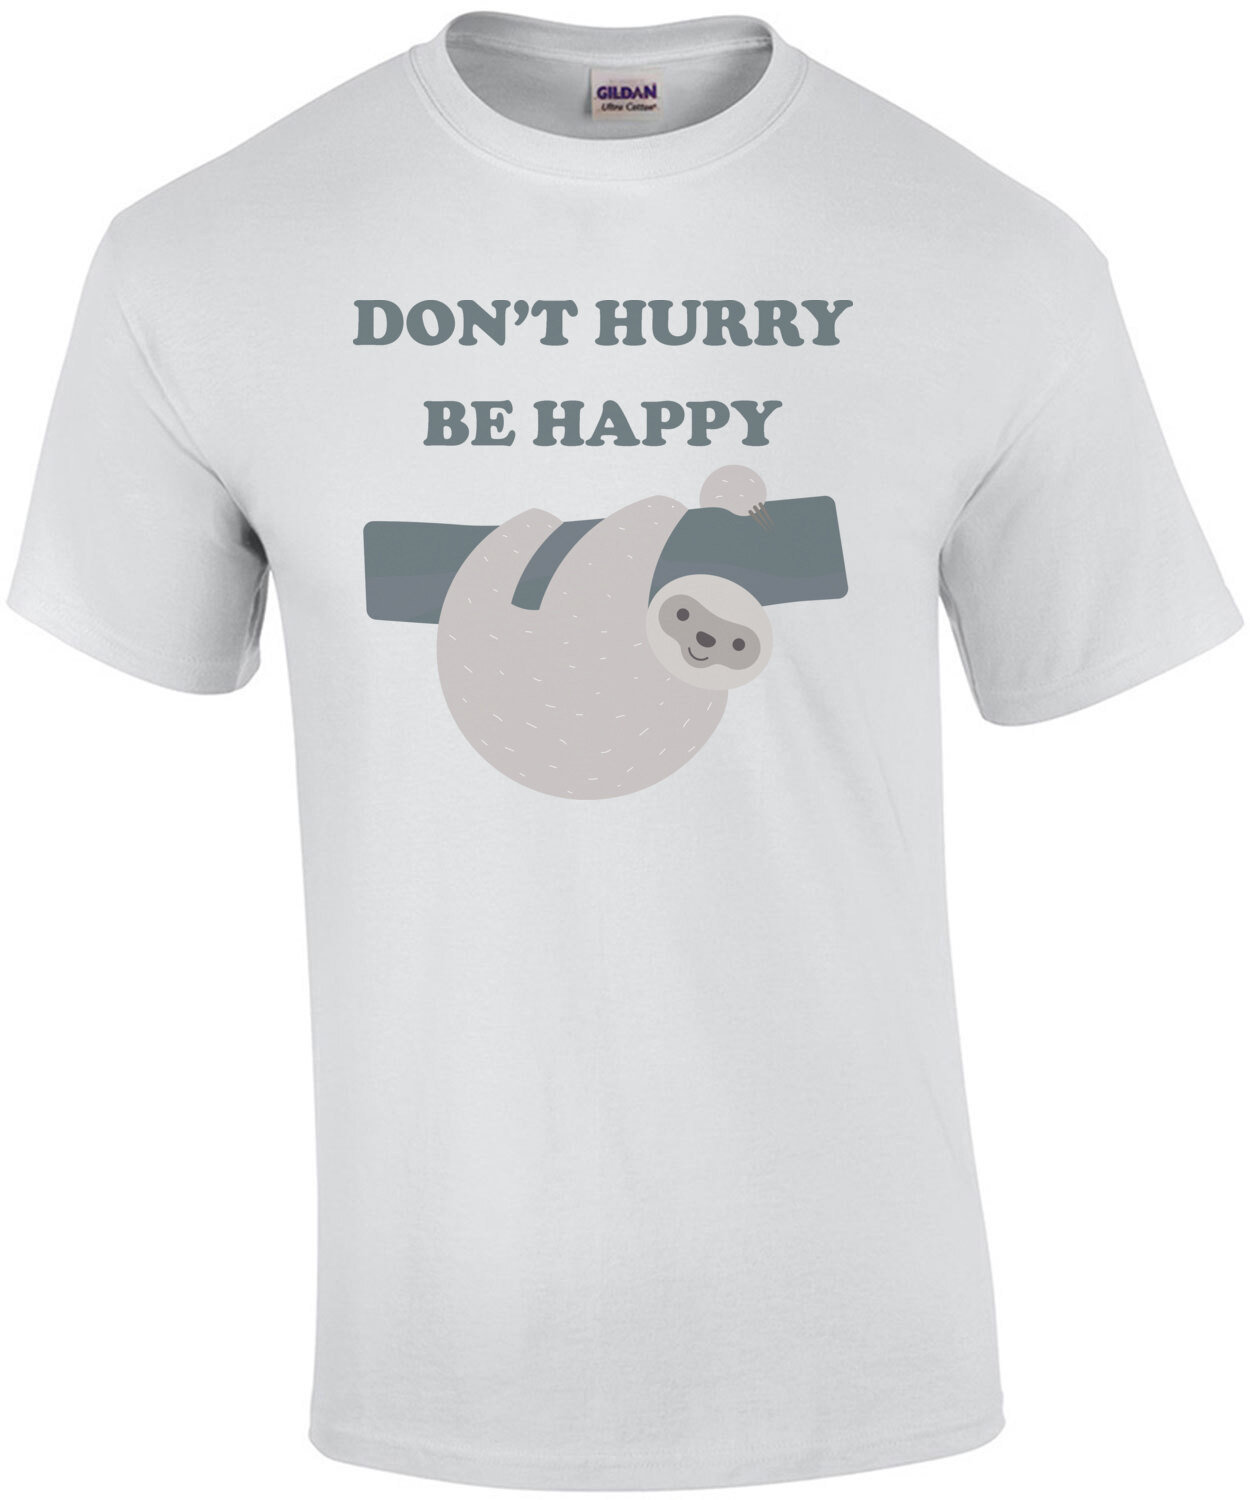 Don't hurry be happy - funny sloth t-shirt